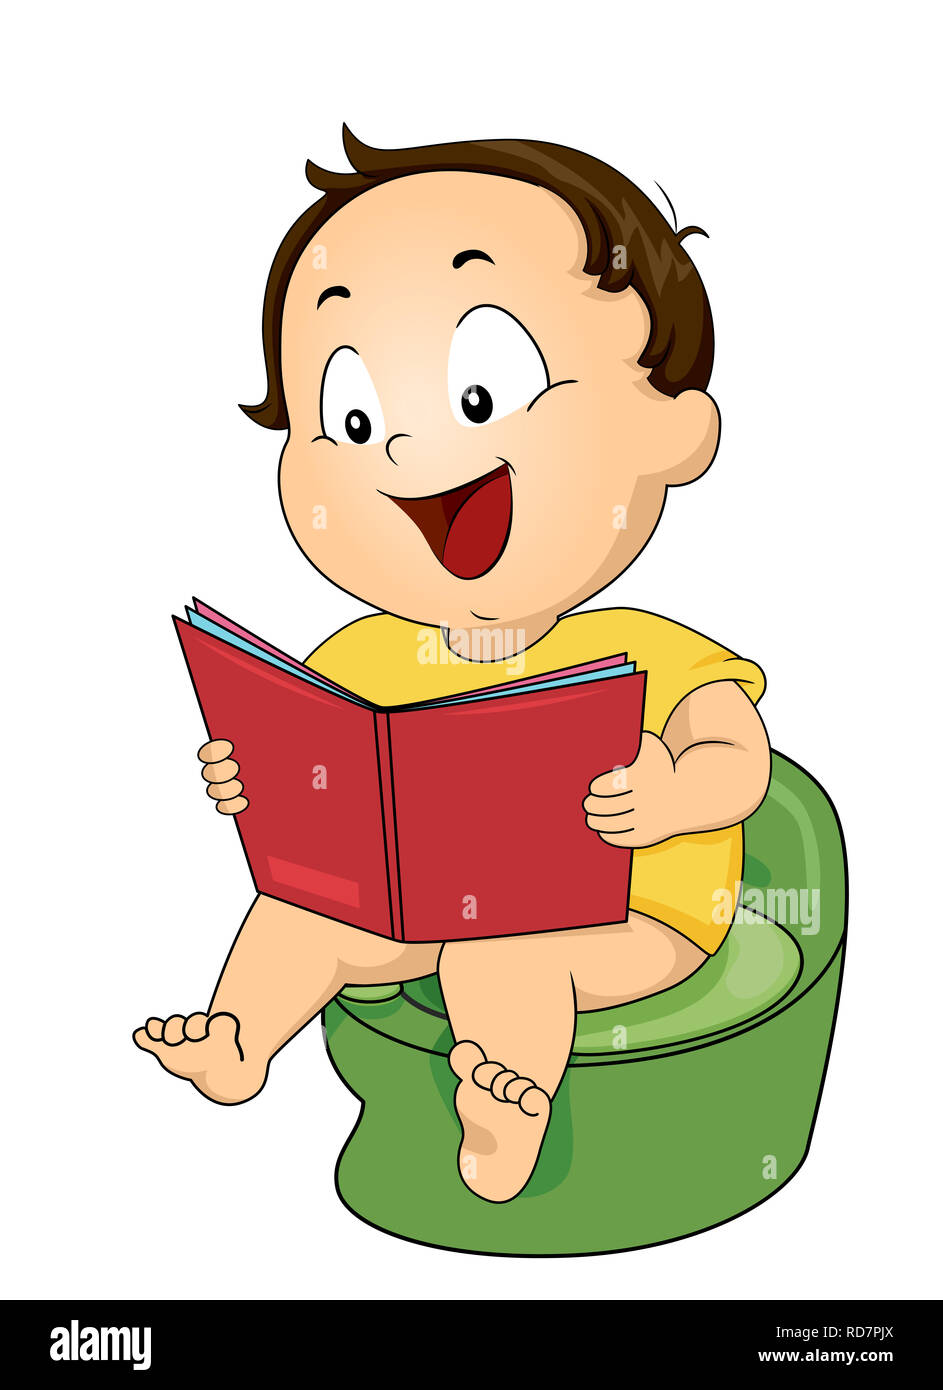 Illustration of a Kid Boy Toddler Sitting on the Potty Reading a Potty Training Book Stock Photo